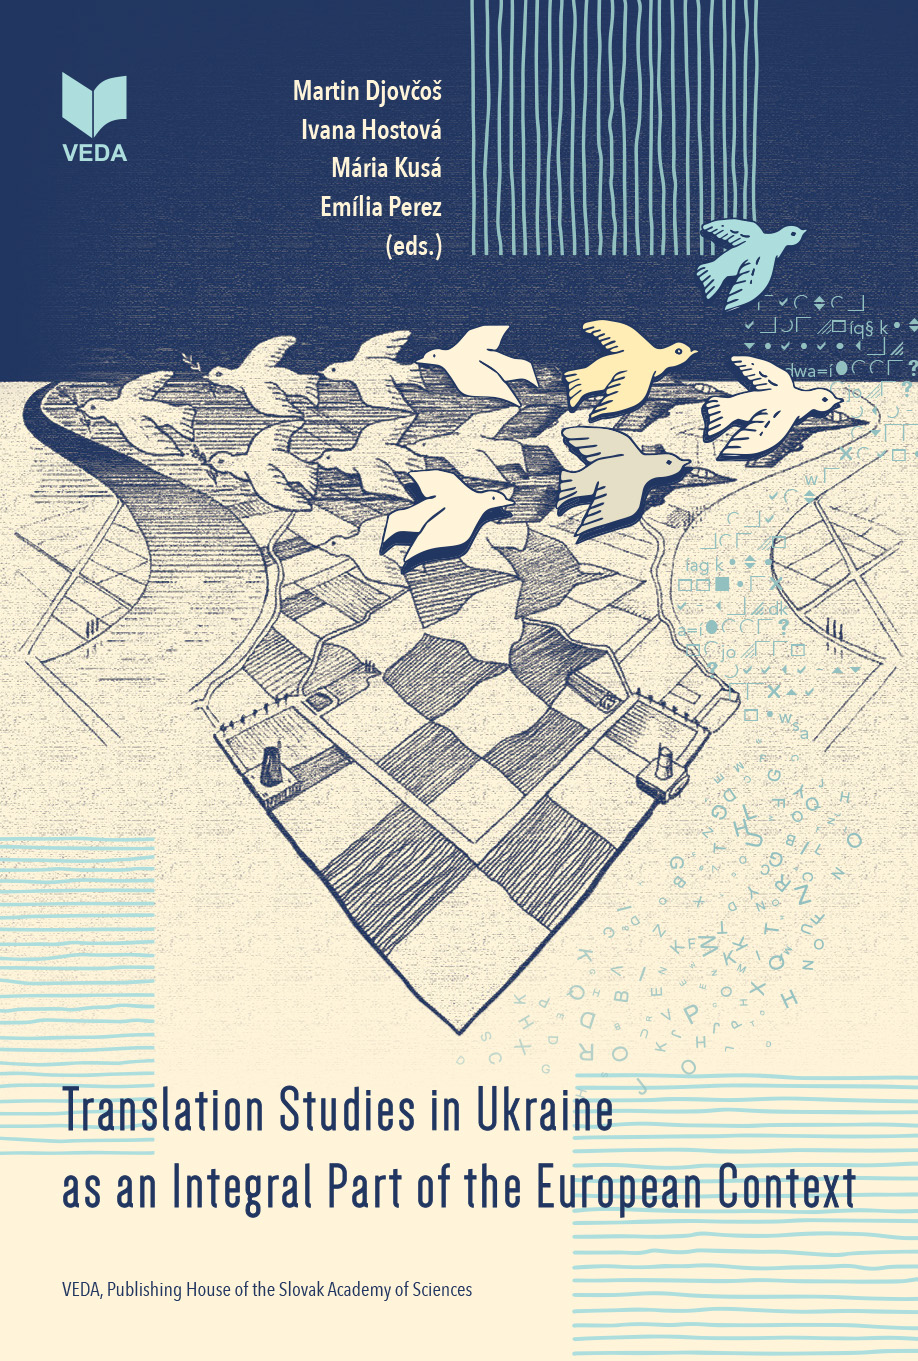 Translation Studies in Ukraine as an Integral Part of the European Context